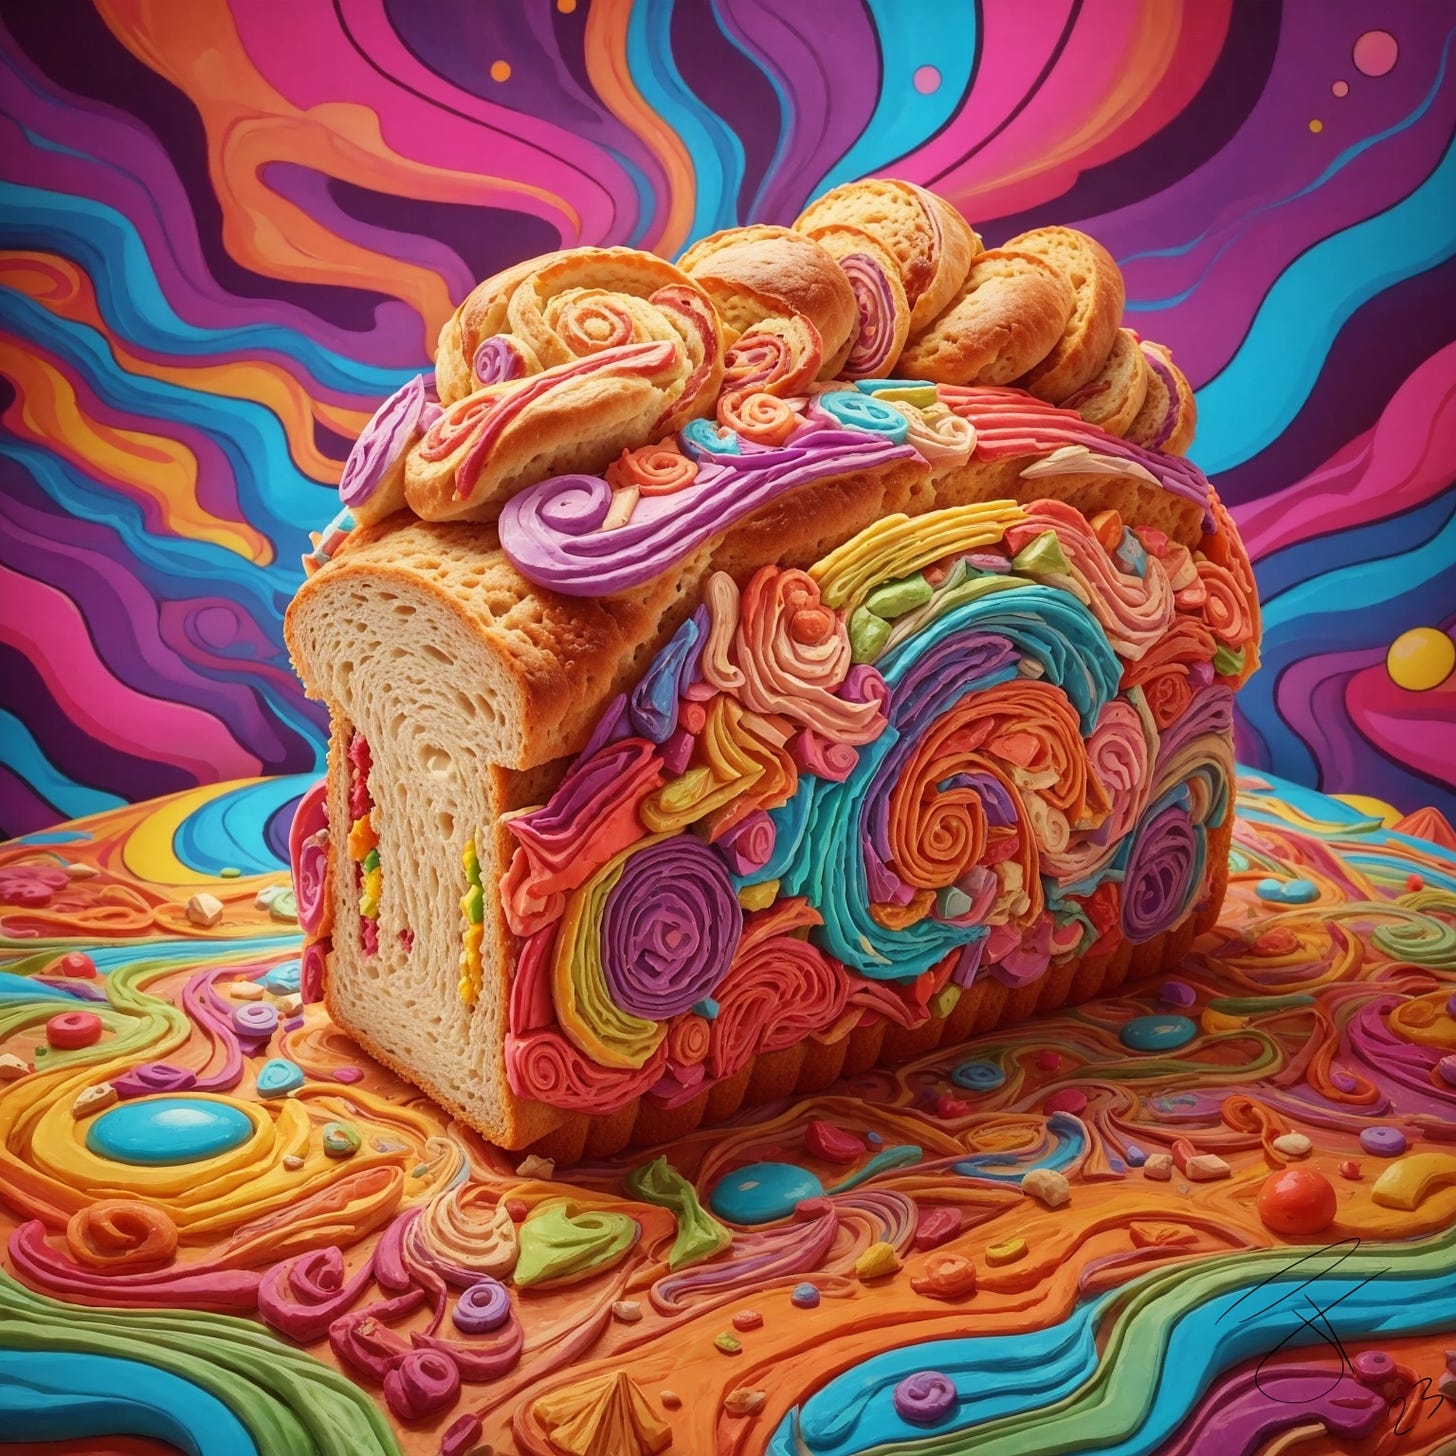 psychedelic surreal loaf bread paradise rainbow